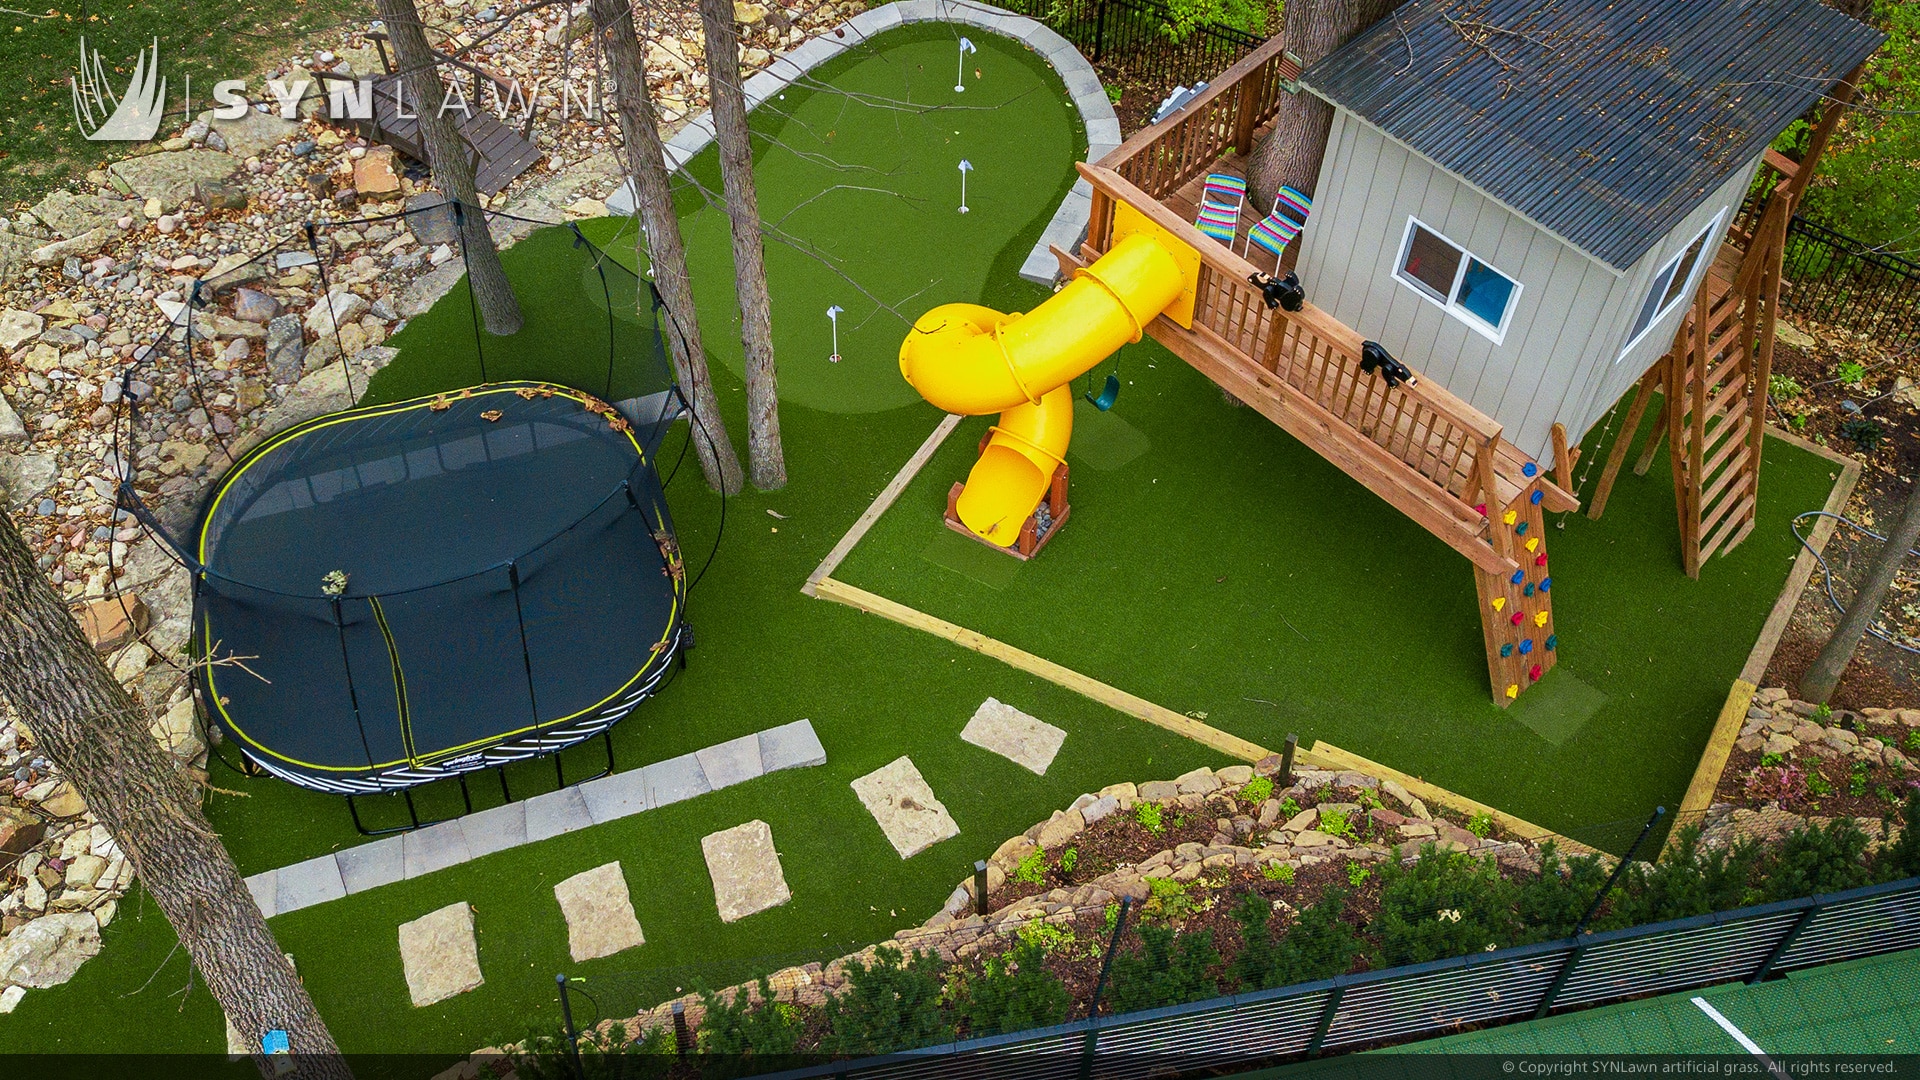 image of SYNLawn Windsor CA Backyard Treehouse Residential Trampoline